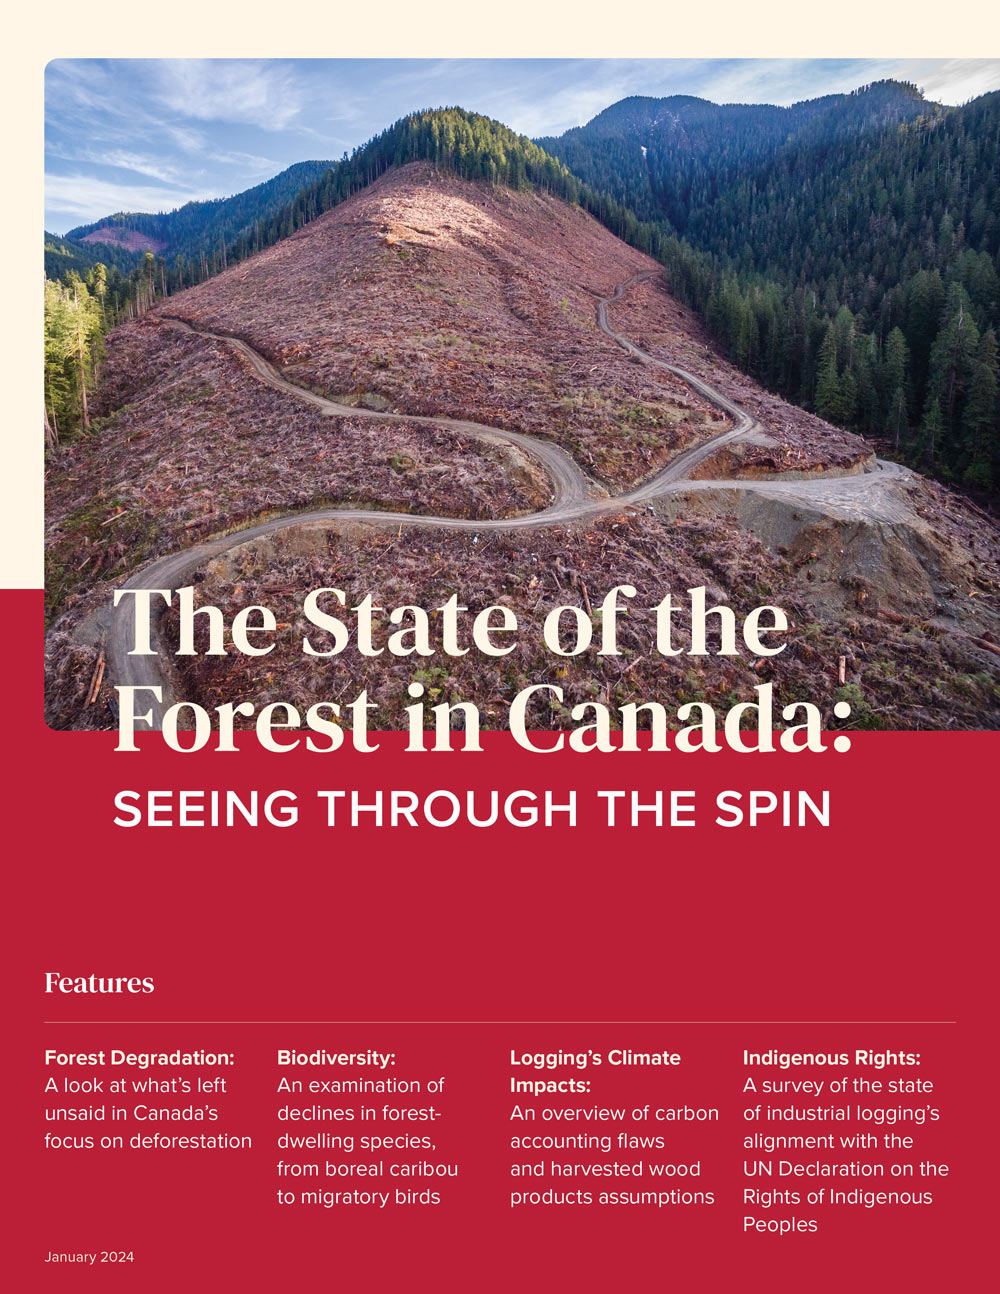 The State of the Forest in Canada report cover